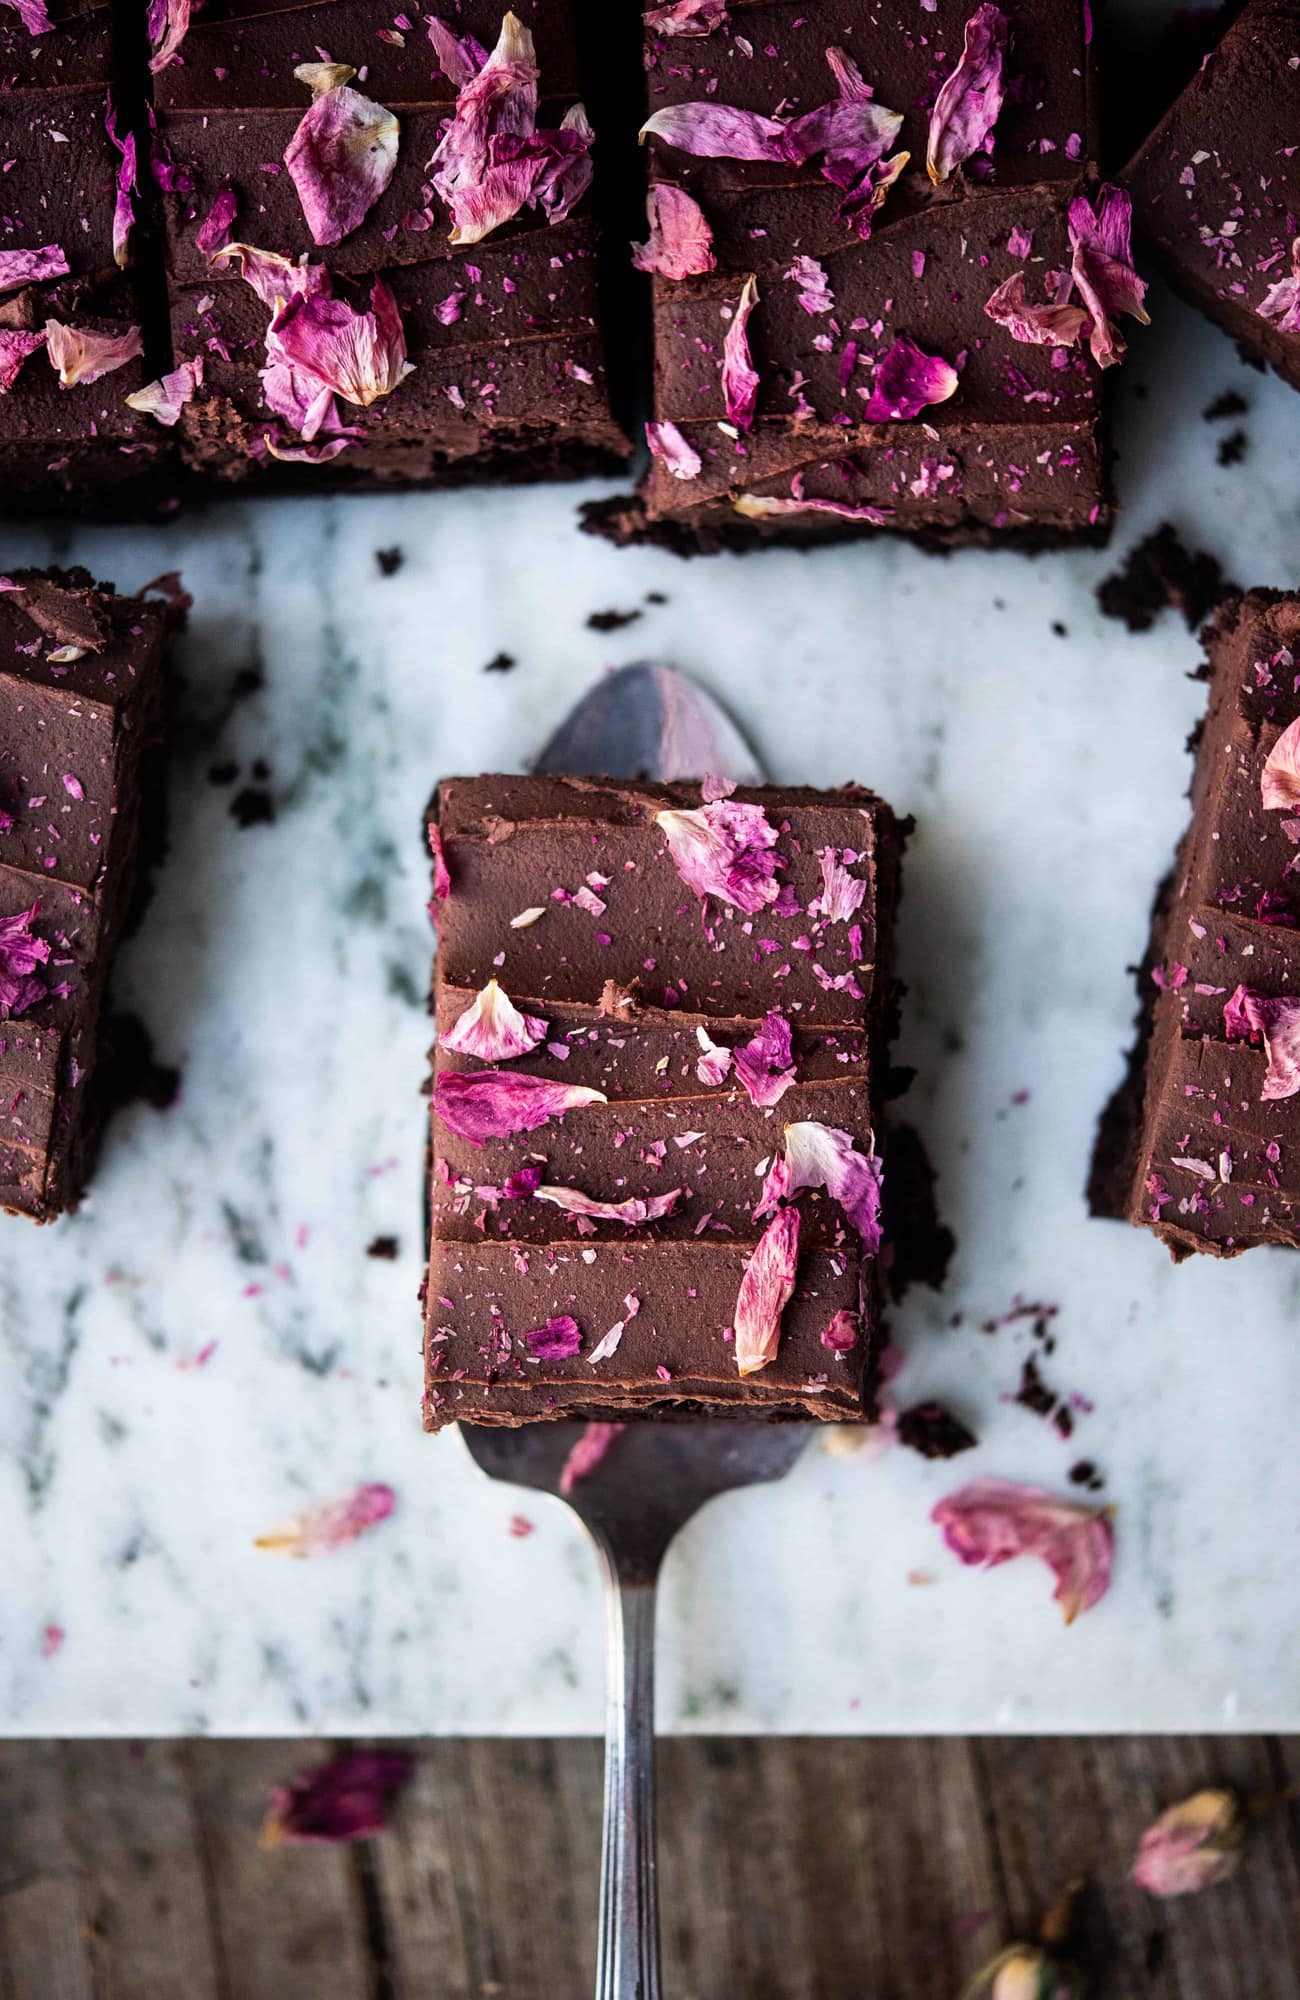 Overhead close up of one chocolate ganache brownie with rose petals on serving utensil